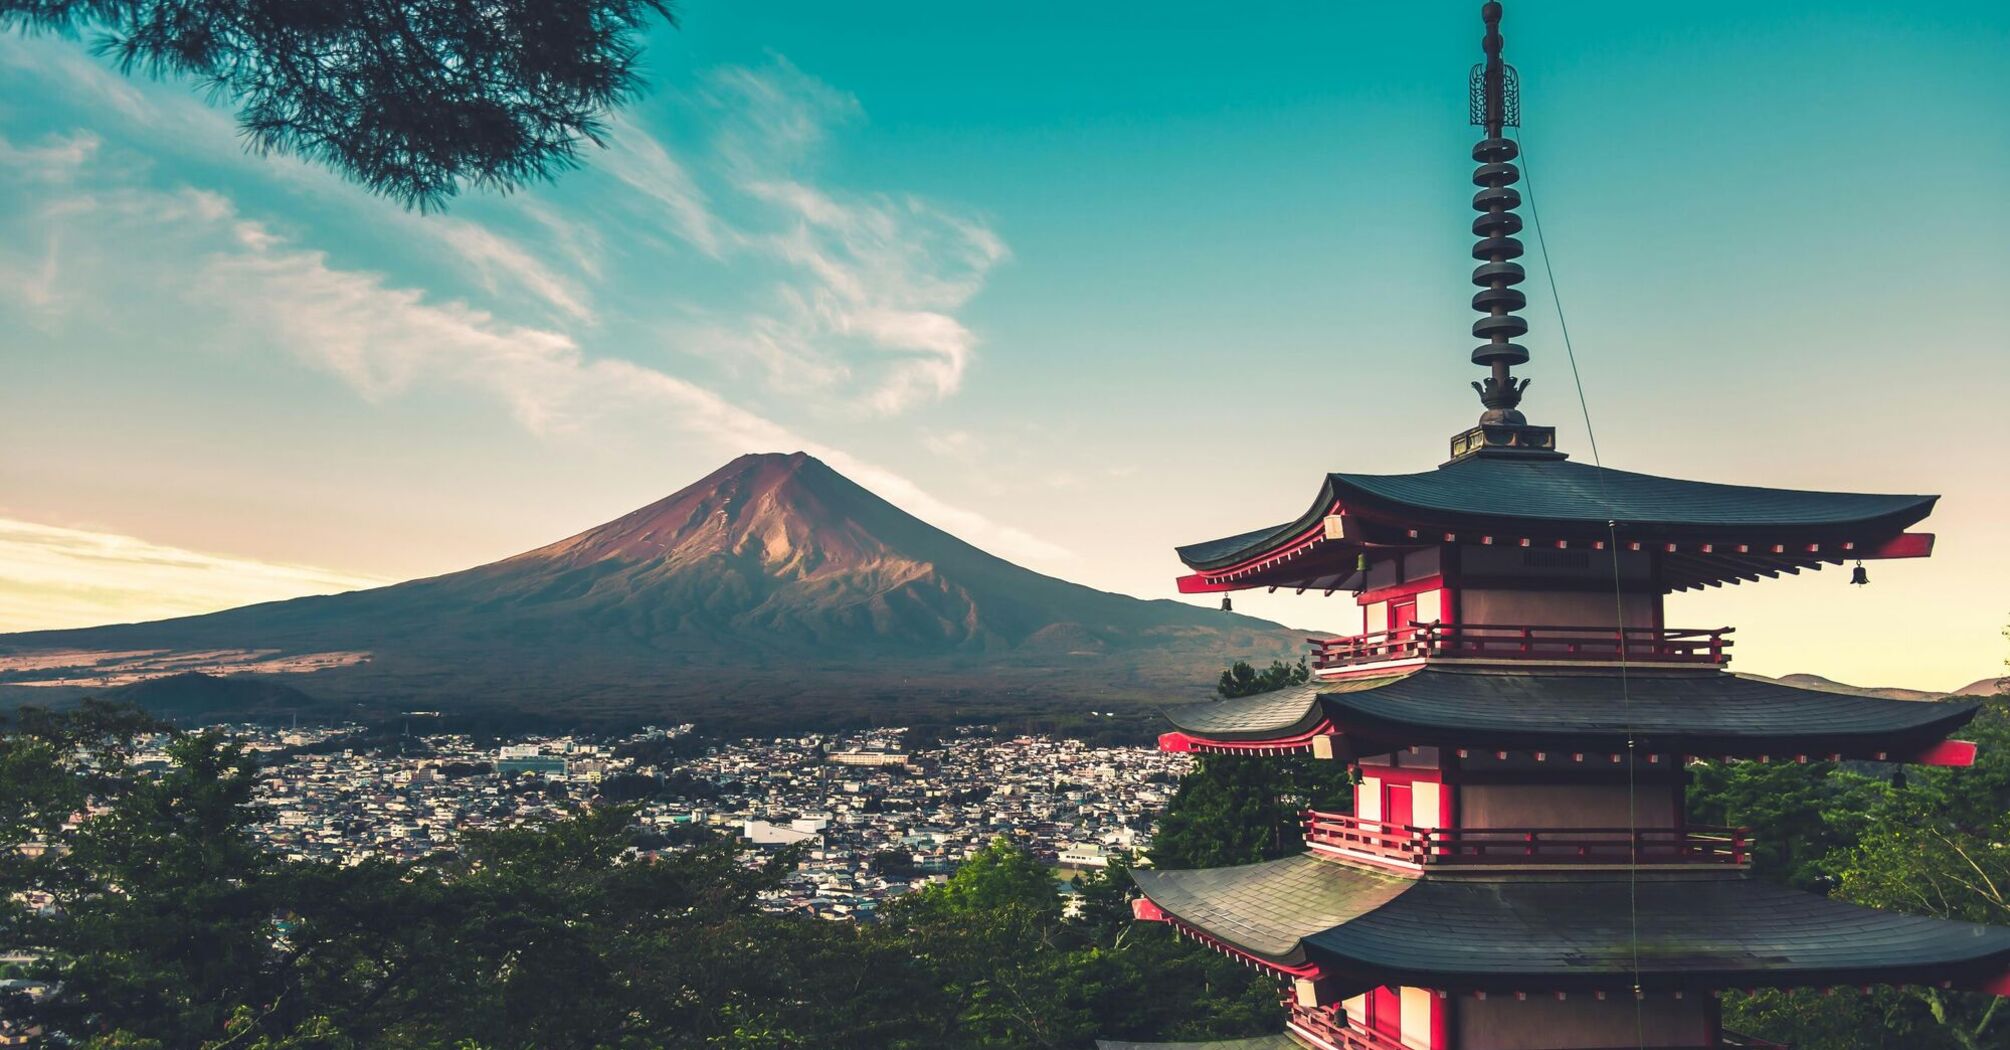 A pagoda with red and white tiers in the foreground with Mount Fuji and a town in the background at dusk